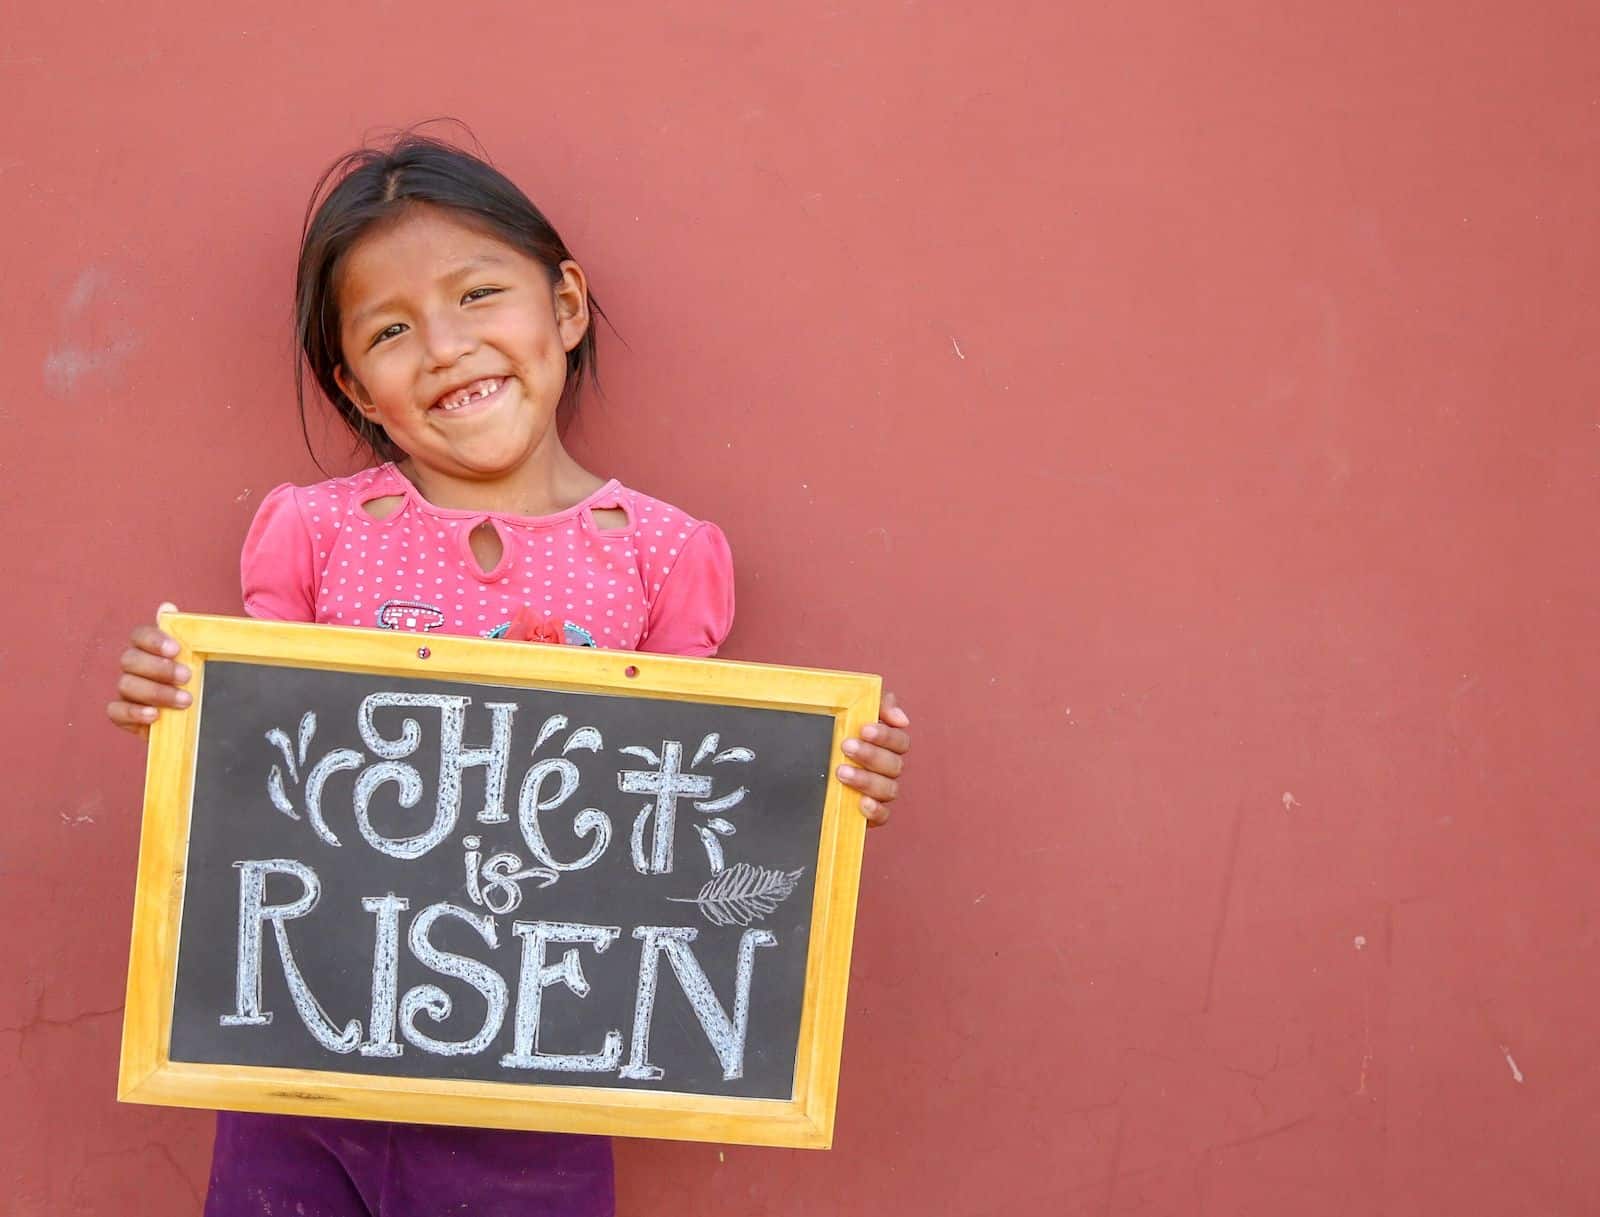 A girl missing her front tooth smiles, holding a chalkboard that says, "He is risen." She is wearing a pink shirt and purple pants and stands in front of a coral colored wall.